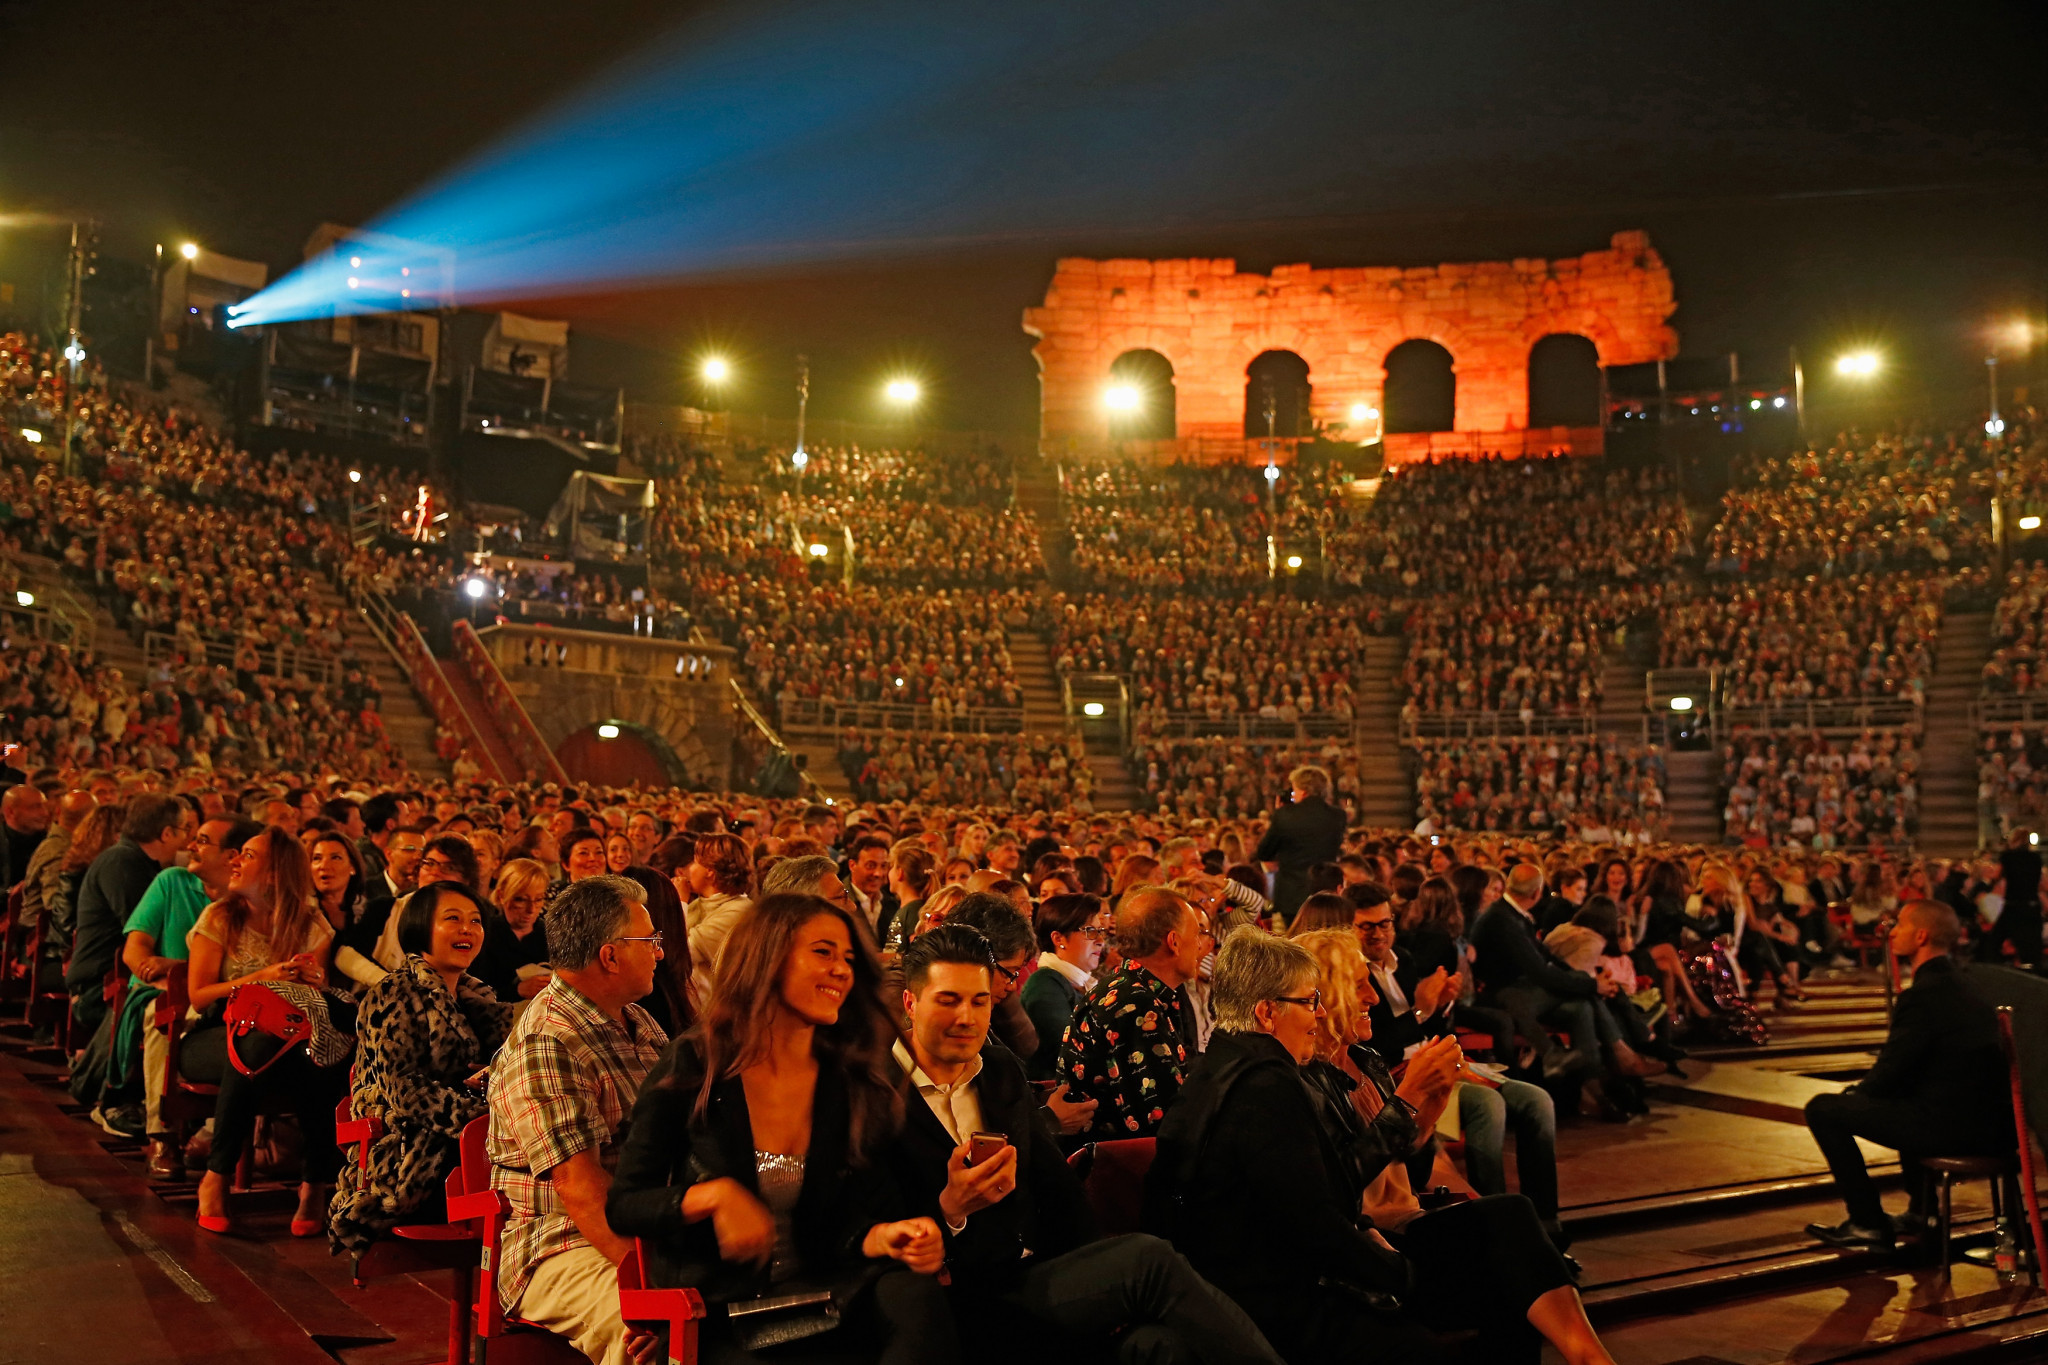 Verona Arena has become known as a venue for opera ©Getty Images